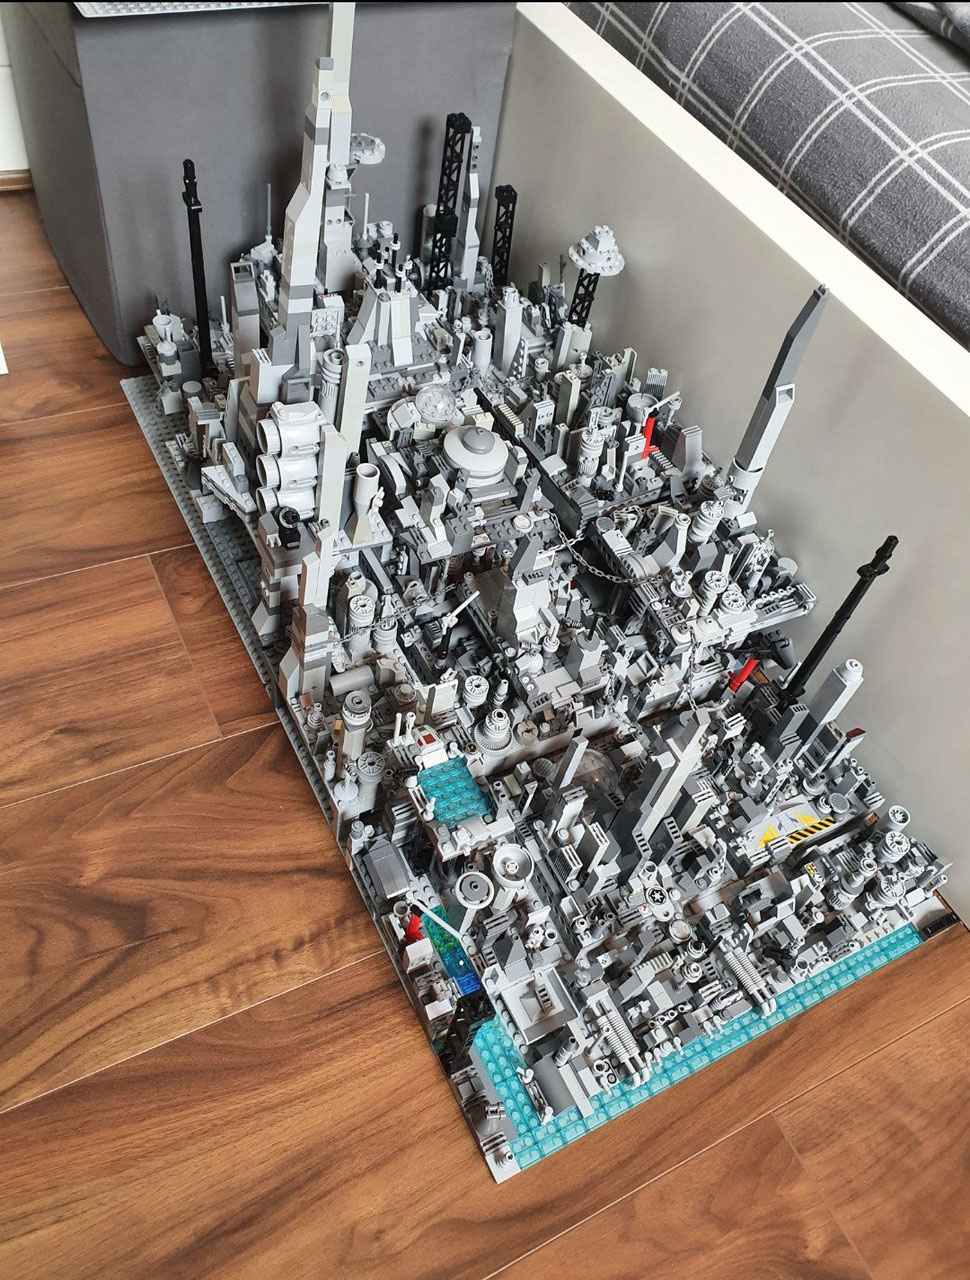 Meet The 14 Year Old Who Built A LEGO Model of Manhattan â if it's hip, it's here